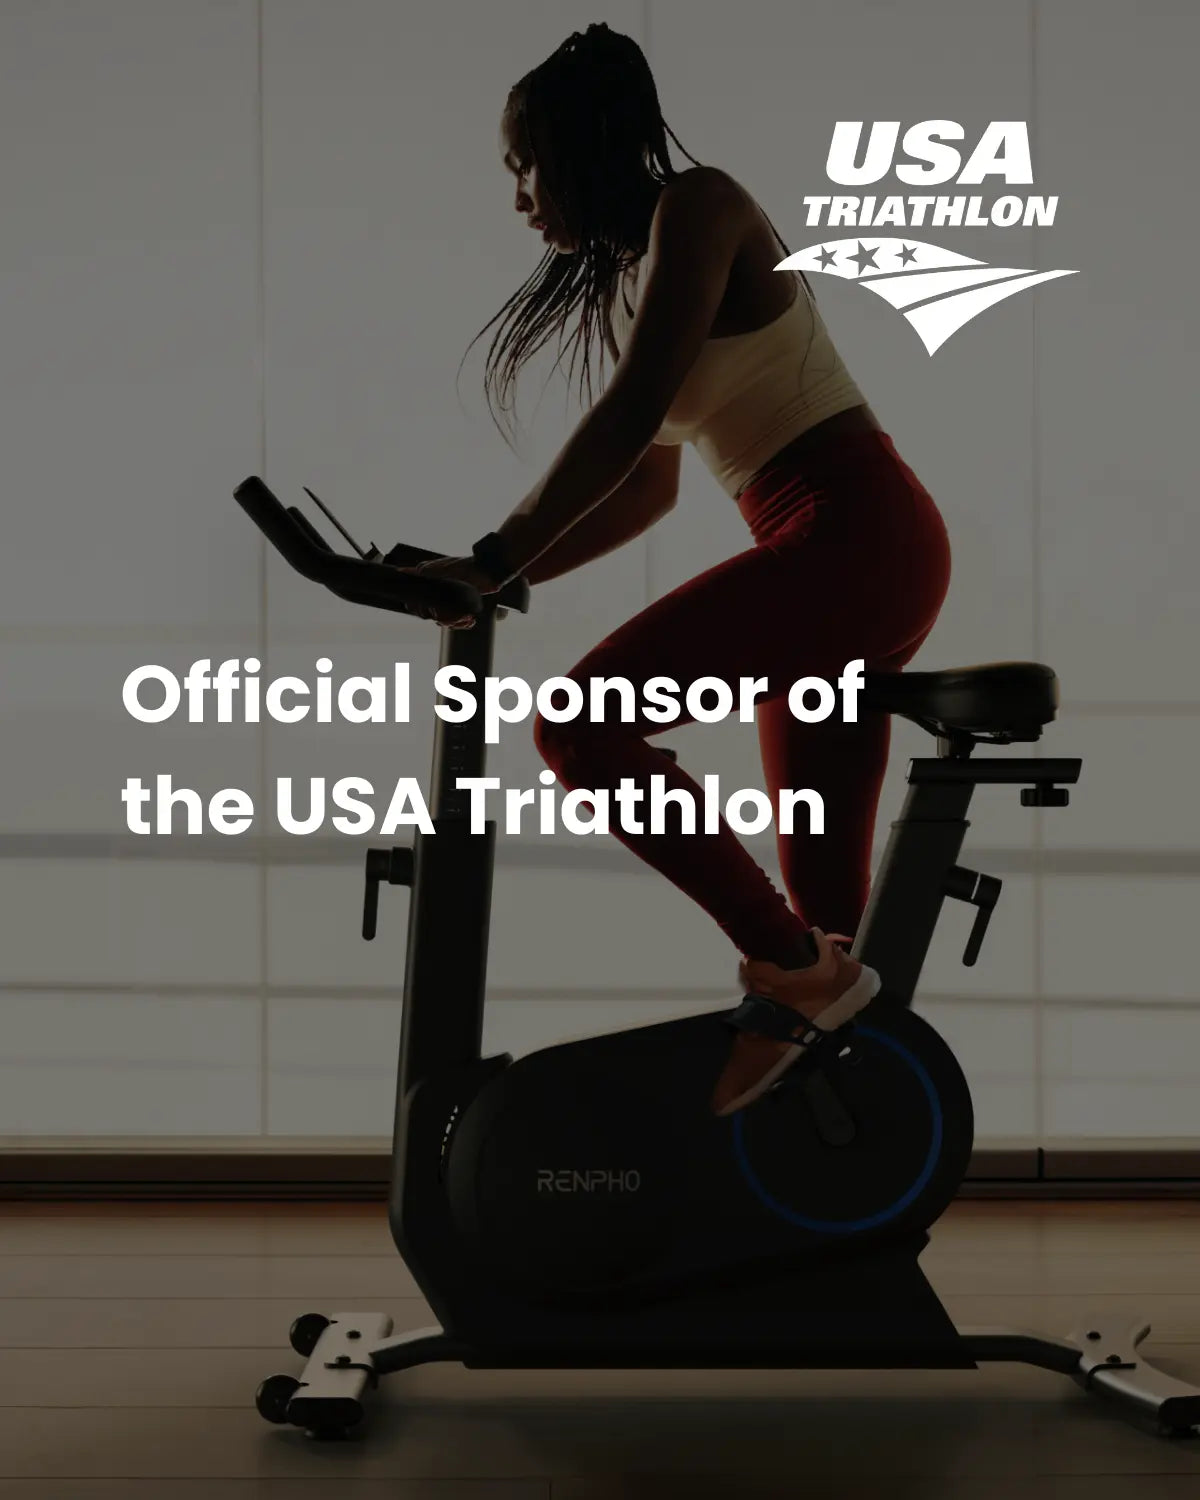 A person rides a Renpho EU AI Smart Bike S indoors with the text "Official Sponsor of the USA Triathlon" overlaid. The silhouette shows the person in cycling attire against a large window, immersed in an immersive fitness experience. The logo of USA Triathlon featuring a star and stripes design is at the top right.